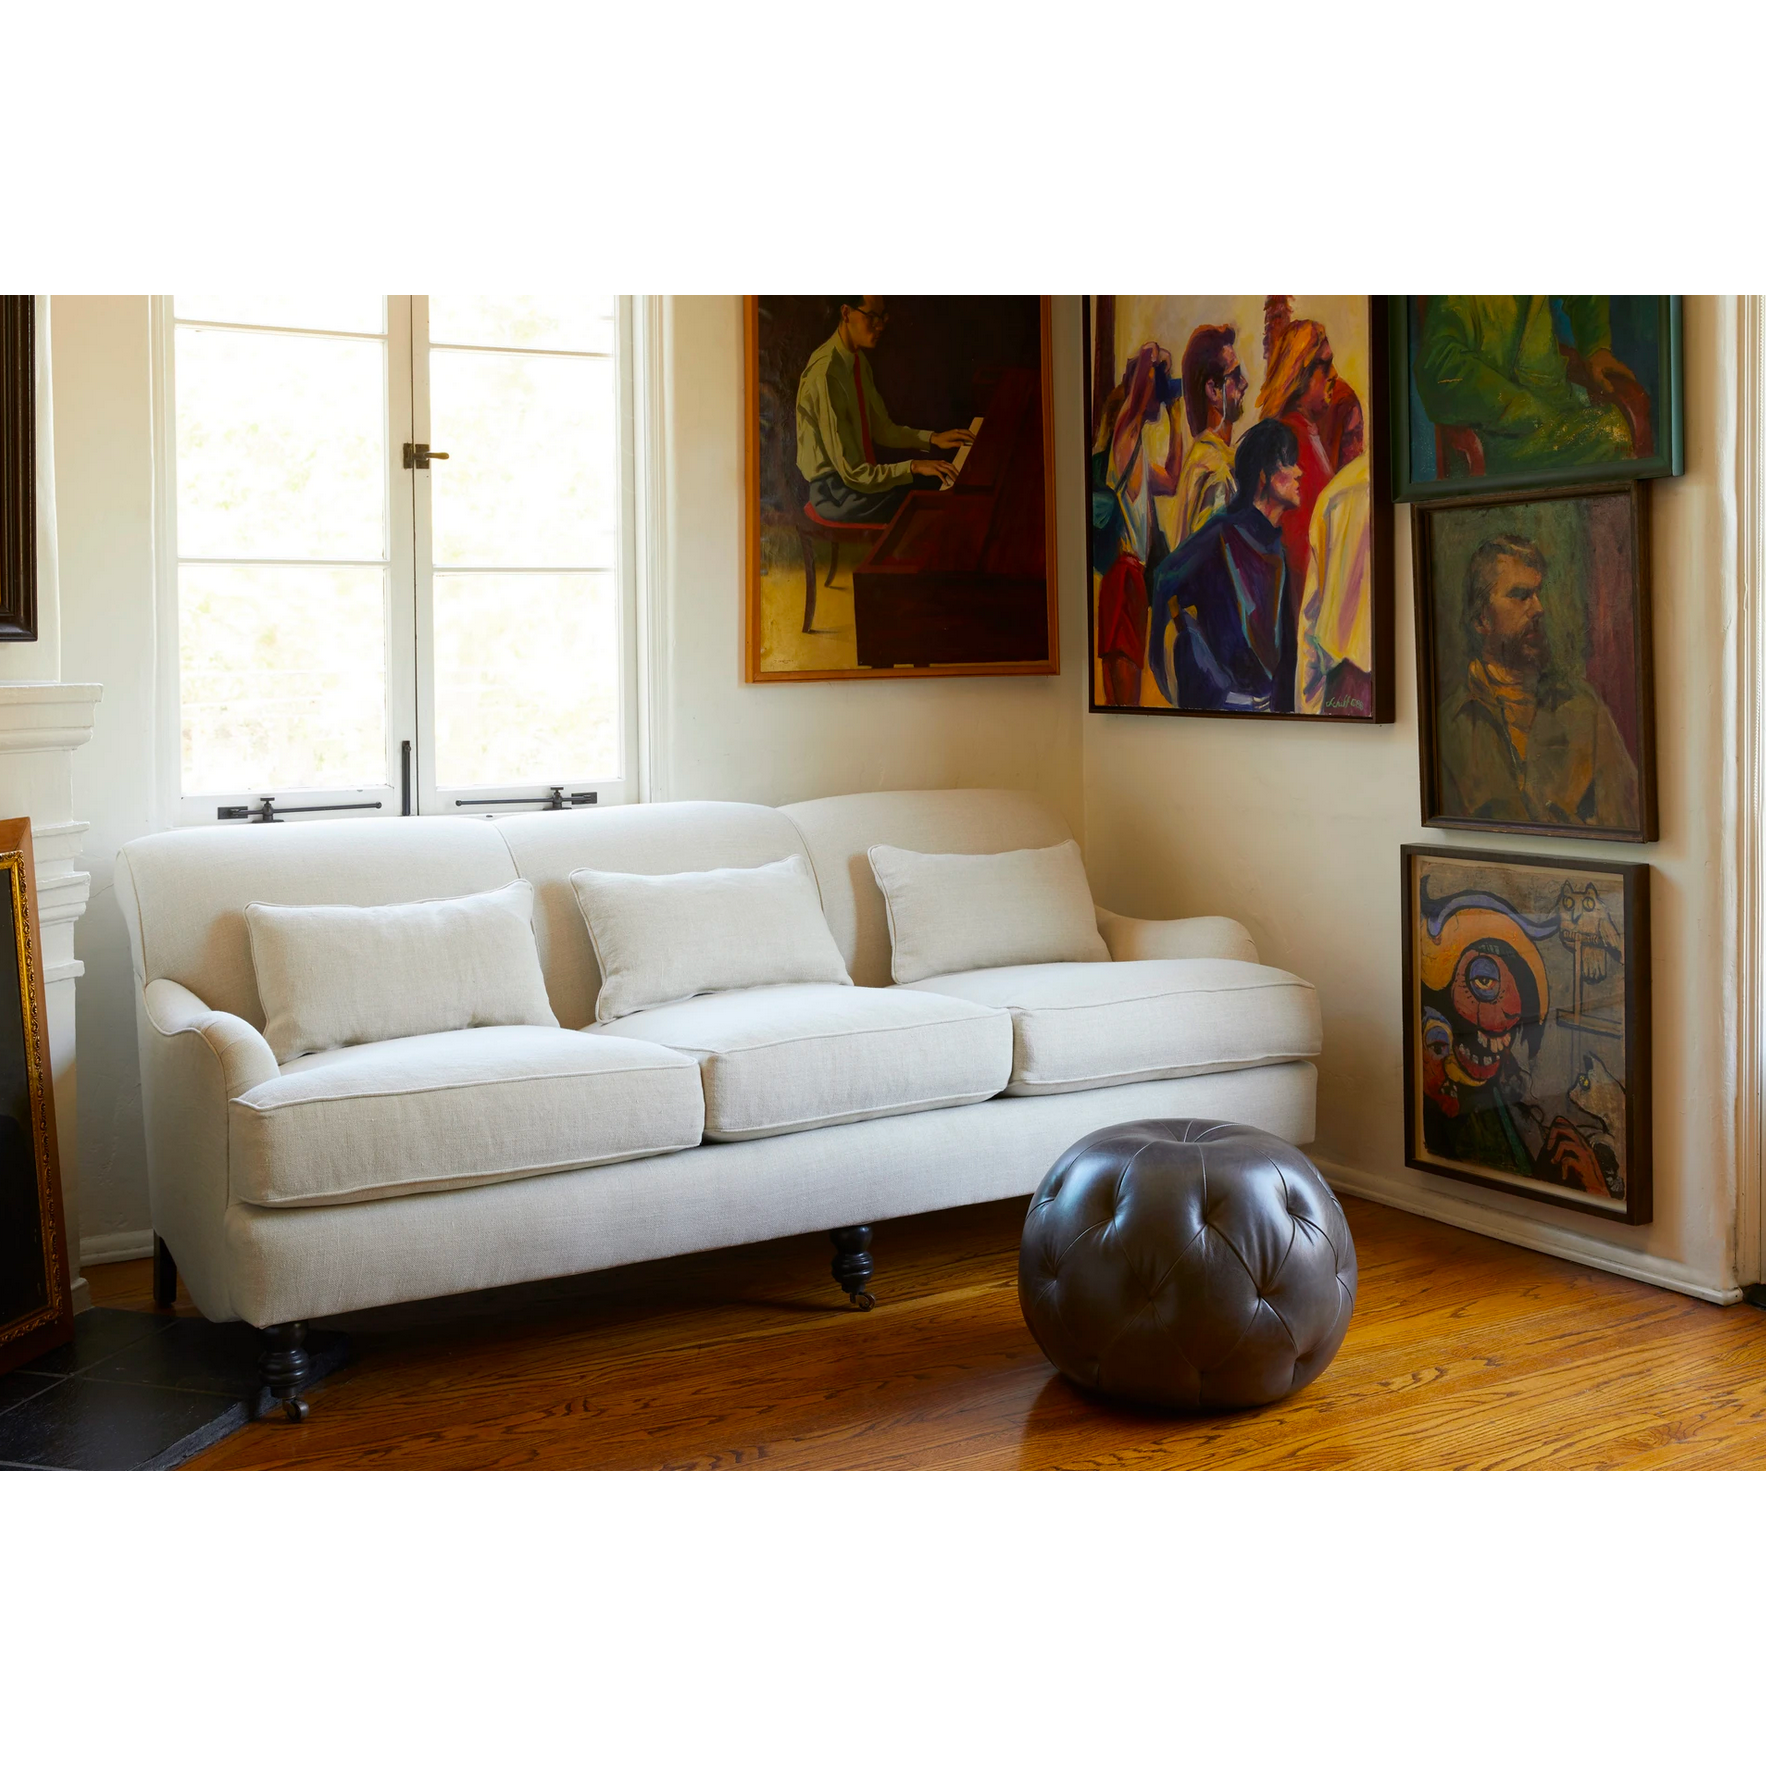 The Beaumont Sofa by Cisco Brothers is a twist on traditional style, with a piping detail and turned front legs with antique casters. Relax into the comfortable lumber pillows for back support with style.  Priced and pictured in grade K fabric Brevard Birch.